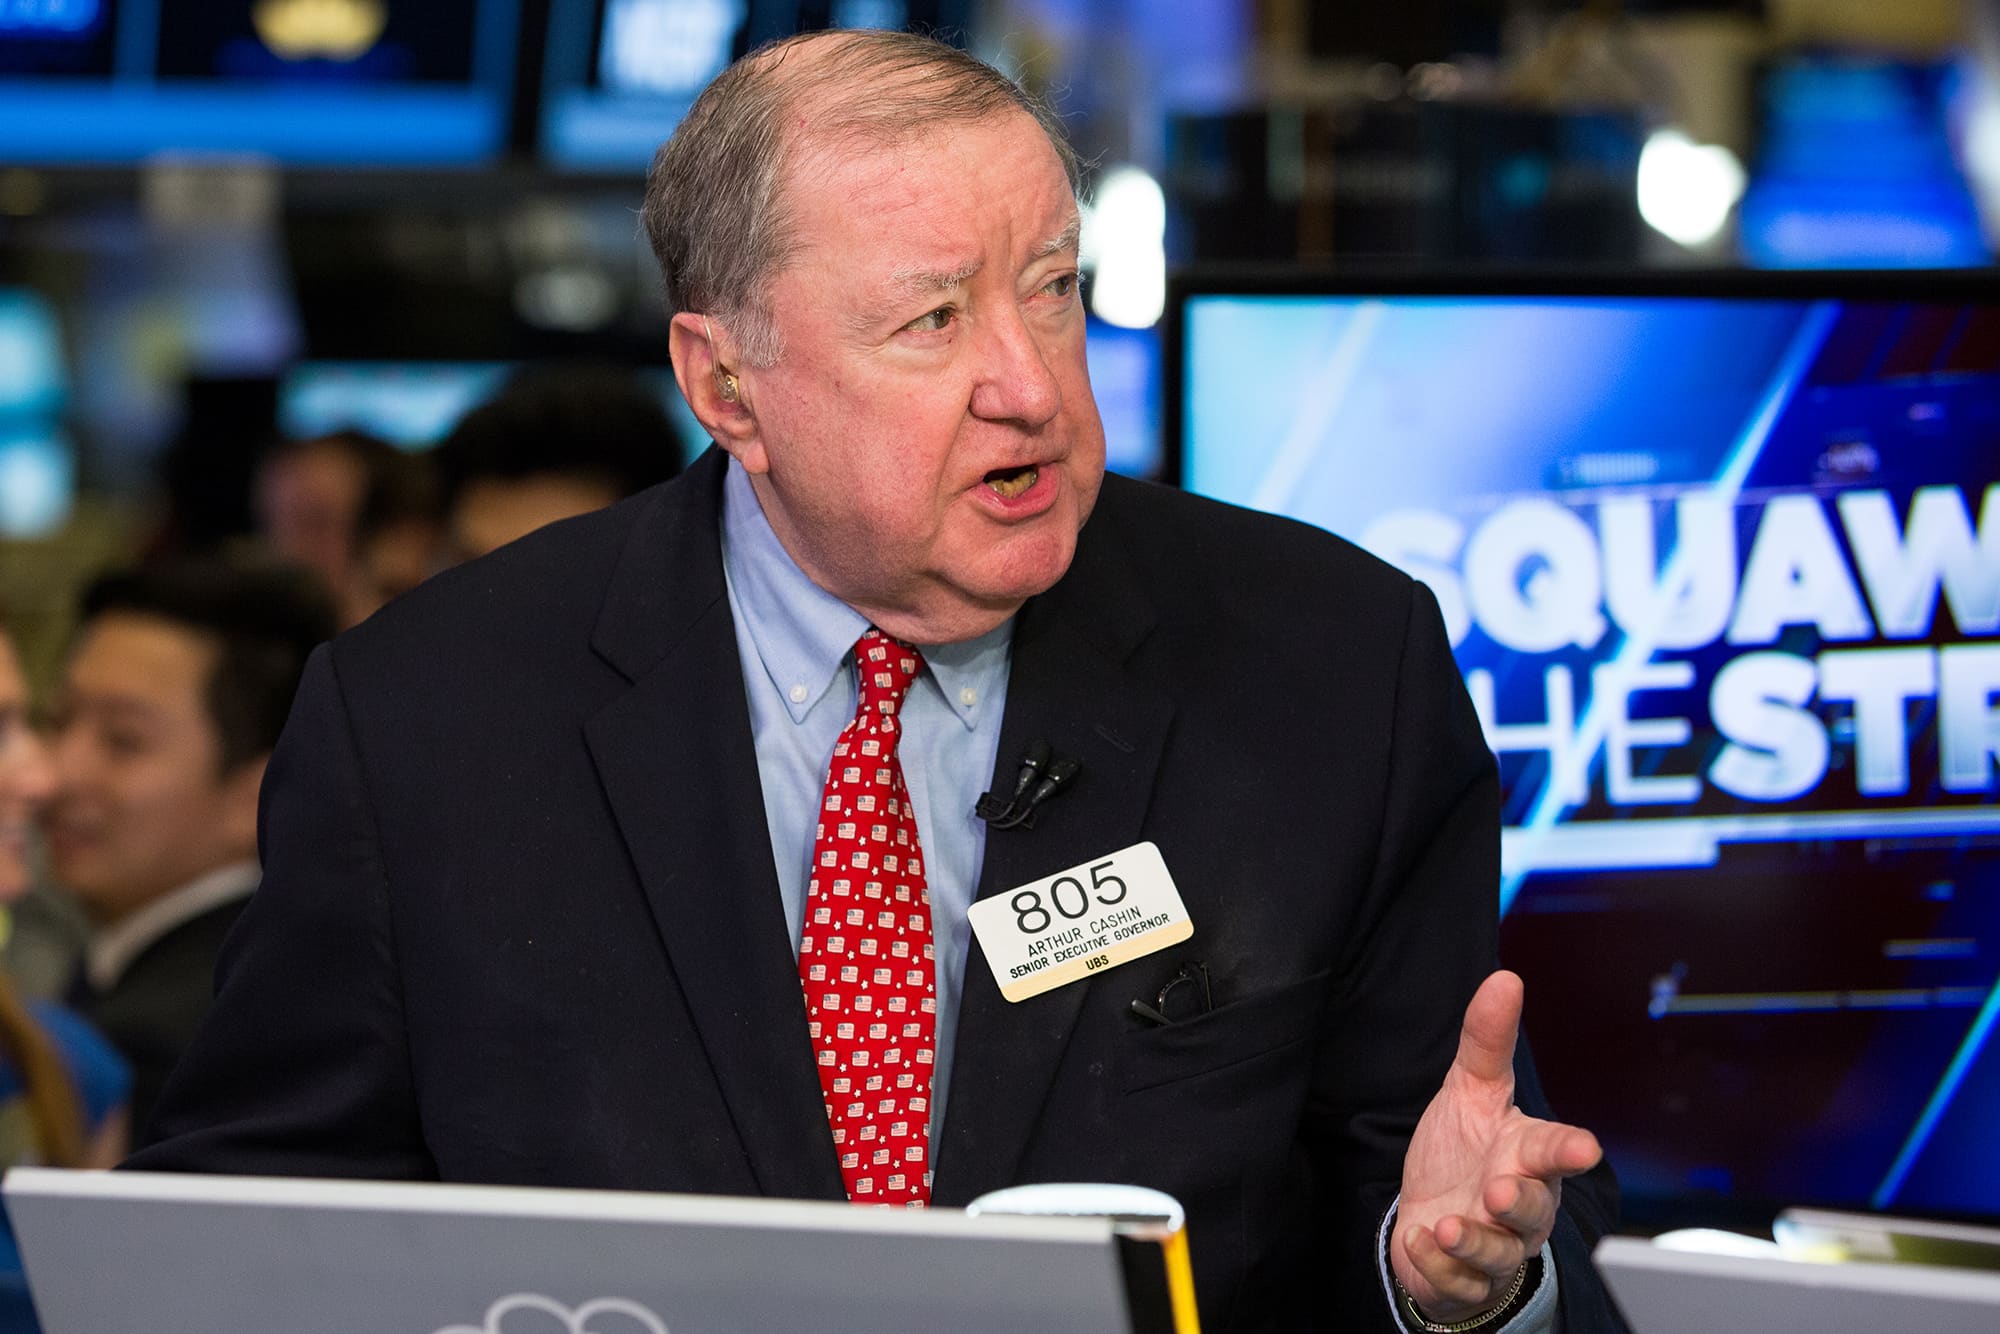 These are the key levels UBS's Art Cashin will be watching as the January rally unravels